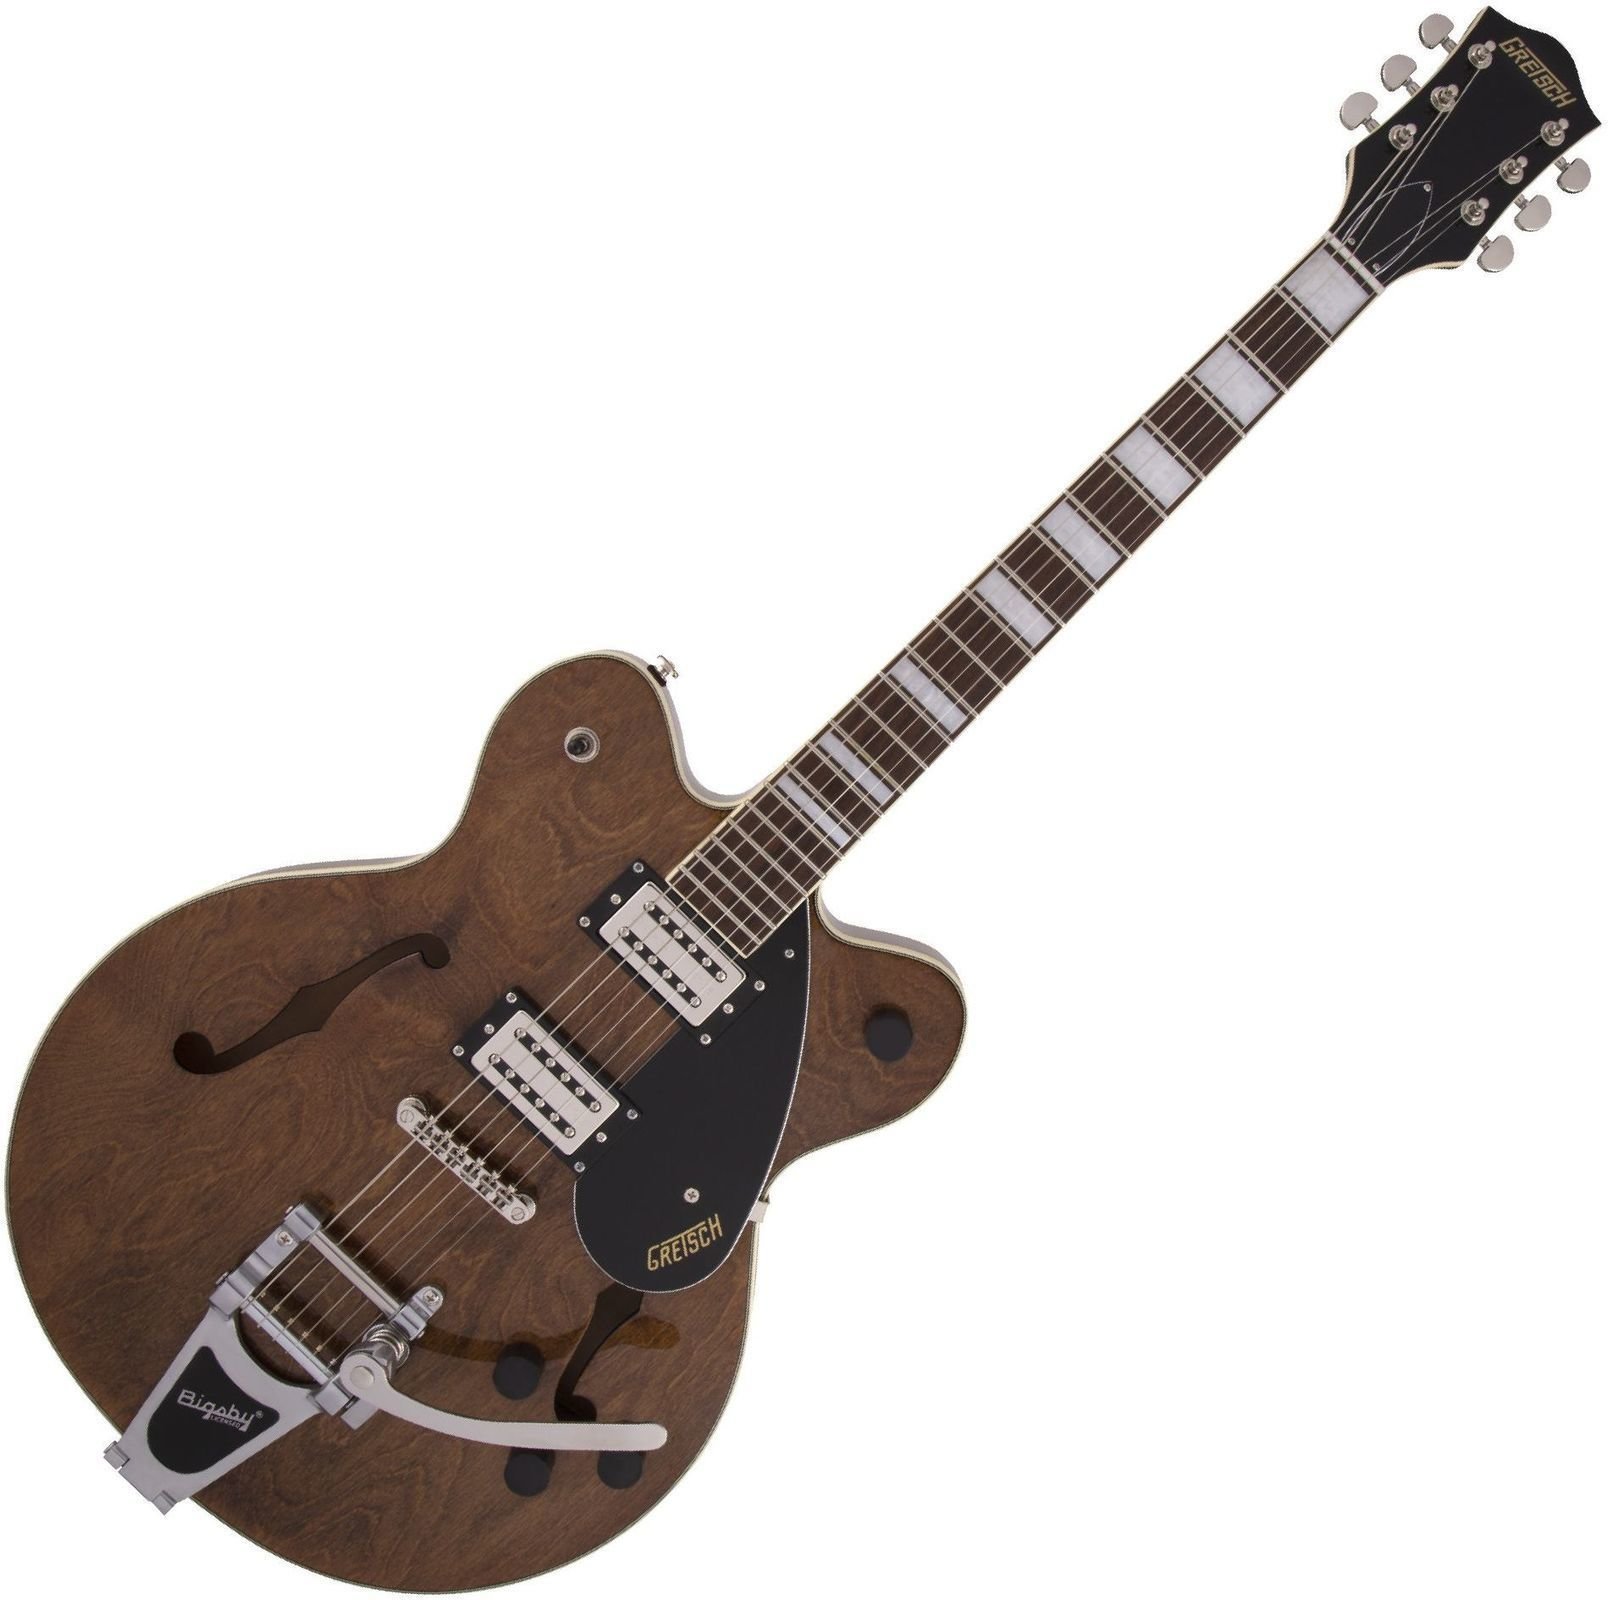 Gretsch G2622T Streamliner CB IL Imperial Stain